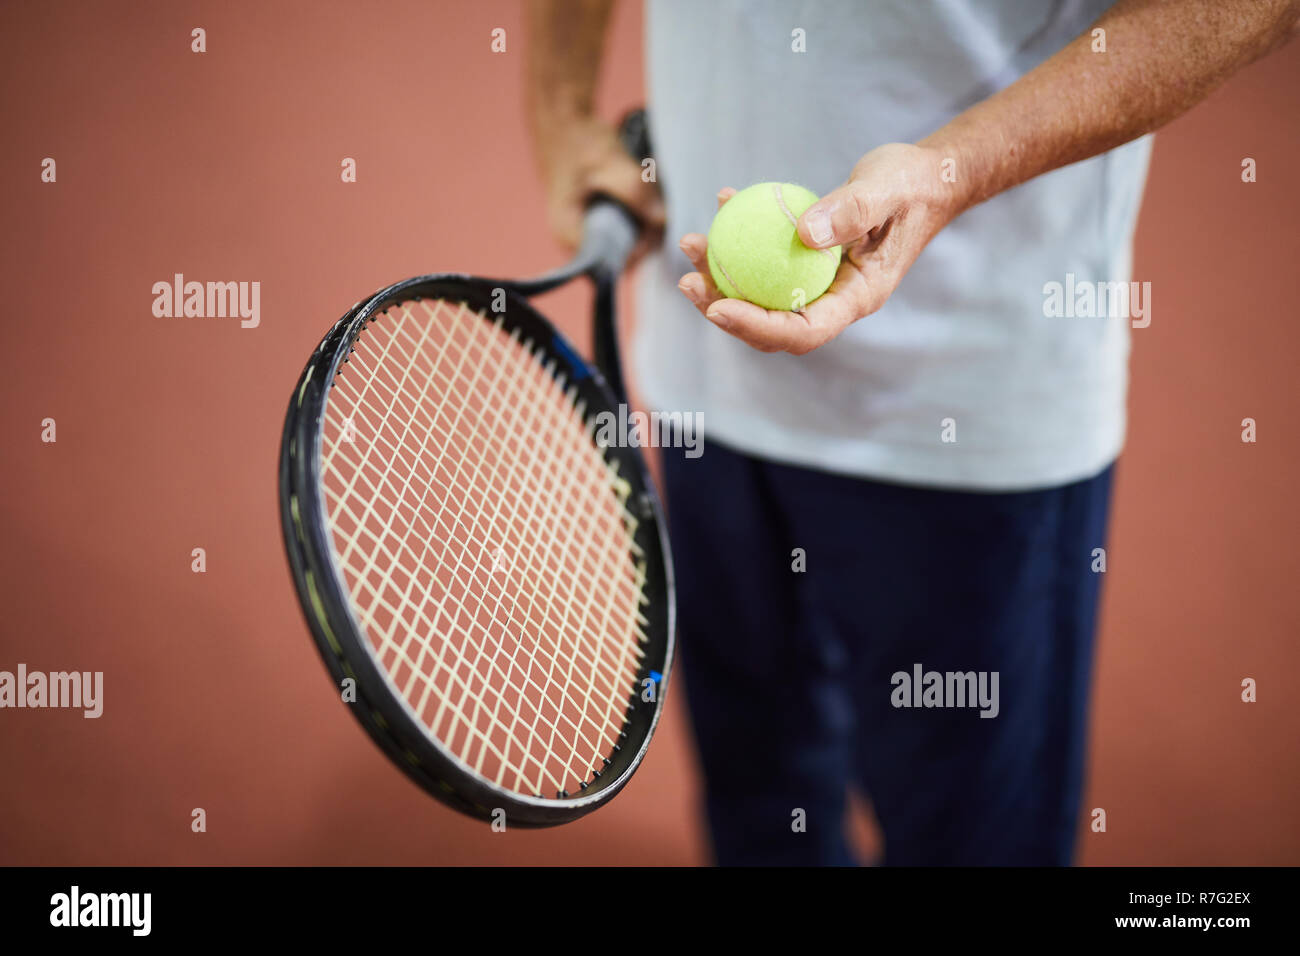 Equipment for tennis game Stock Photo